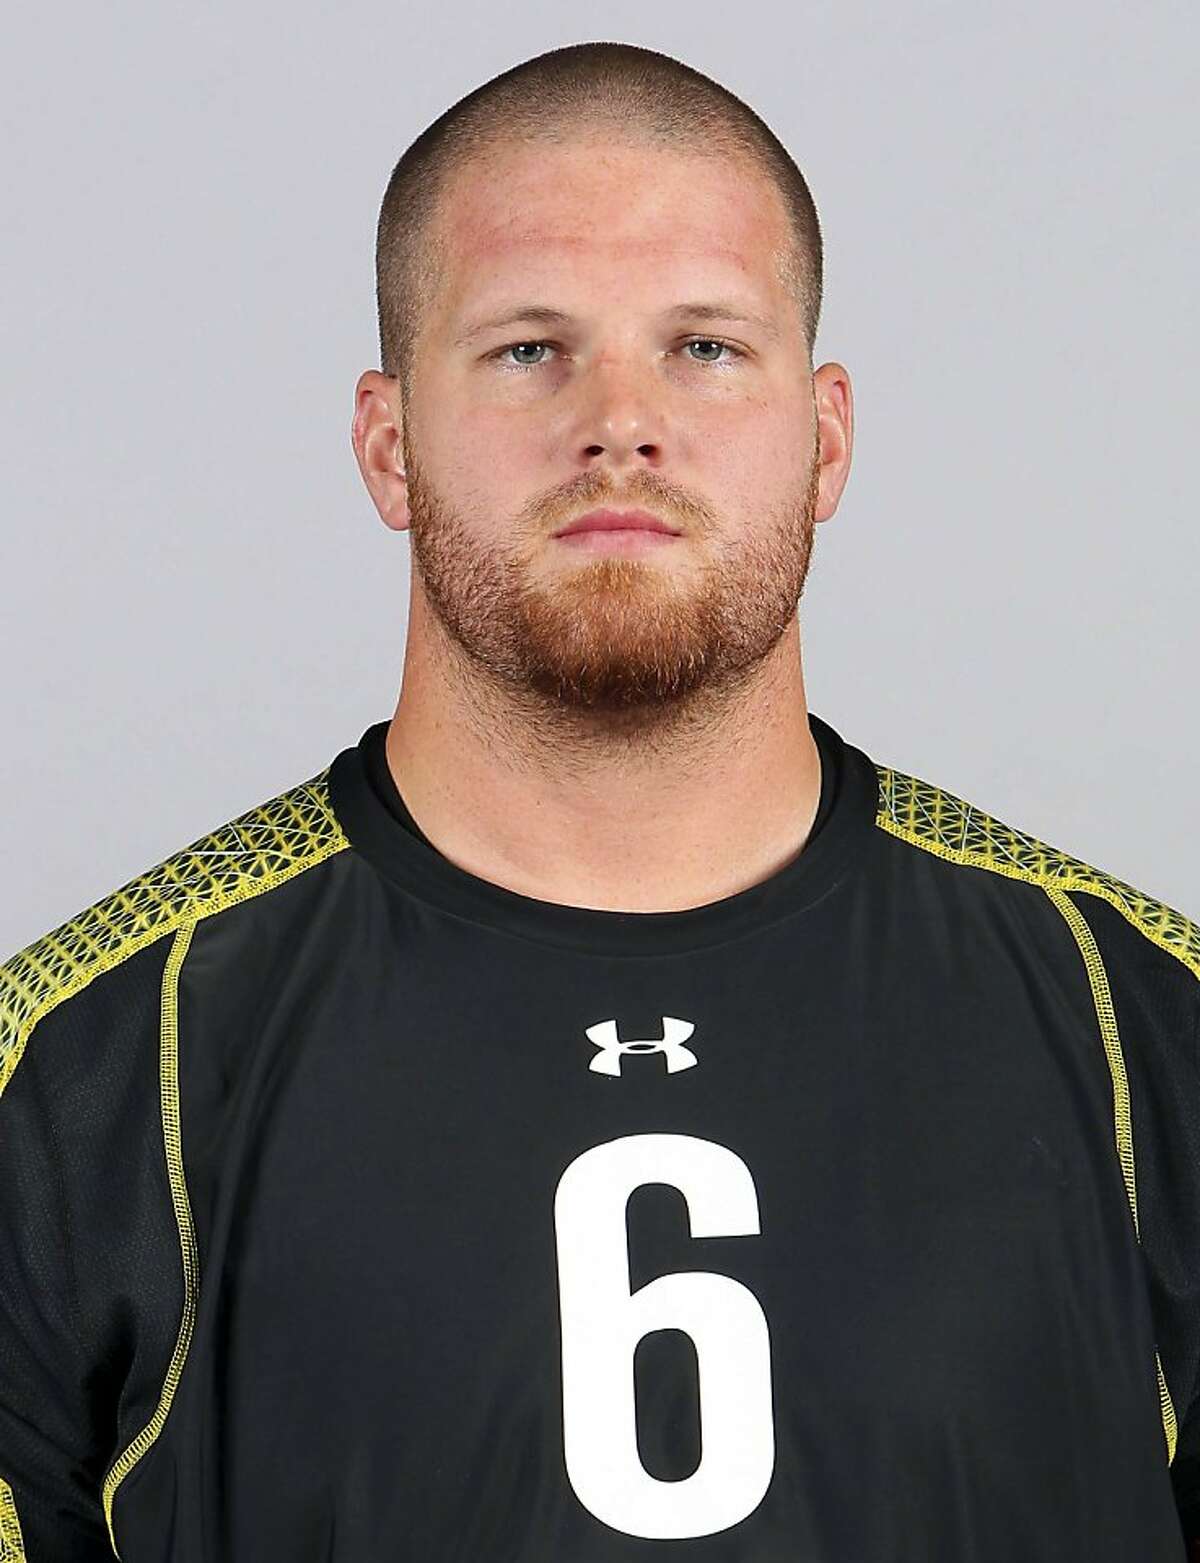 This Feb. 23, 2012, photo shows Utah offensive guard Tony Bergstrom during the NFL Scouting Combine at Lucas Oil Stadium in Indianapolis. Bergstrom was selected as the 95th pick overall by the Oakland Raiders in the third round of the NFL football draft at Radio City Music Hall, Friday, April 27, in New York.